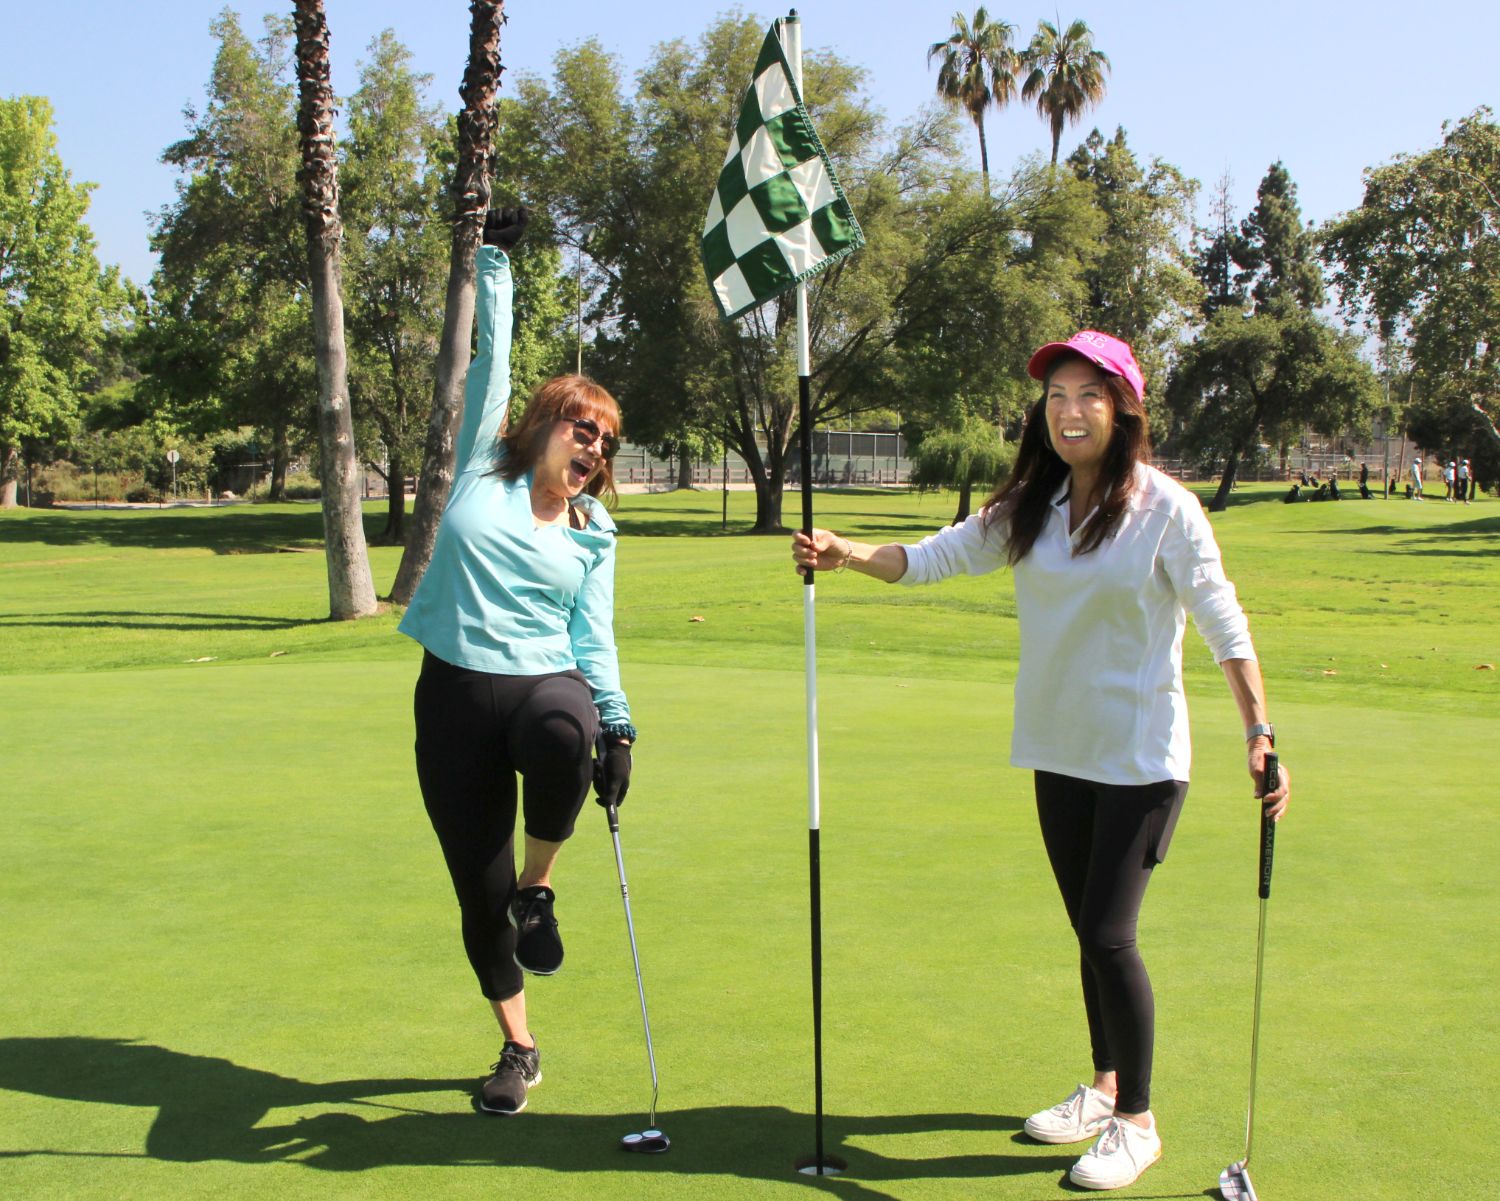 PHOTO: Henk Friezer | The South Pasadenan | Mary Genovia (L) and Sharon Oda celebrate at a hole at the golf tournament. They represent the Woman’s Club of South Pasadena and Alhambra High School alumni.